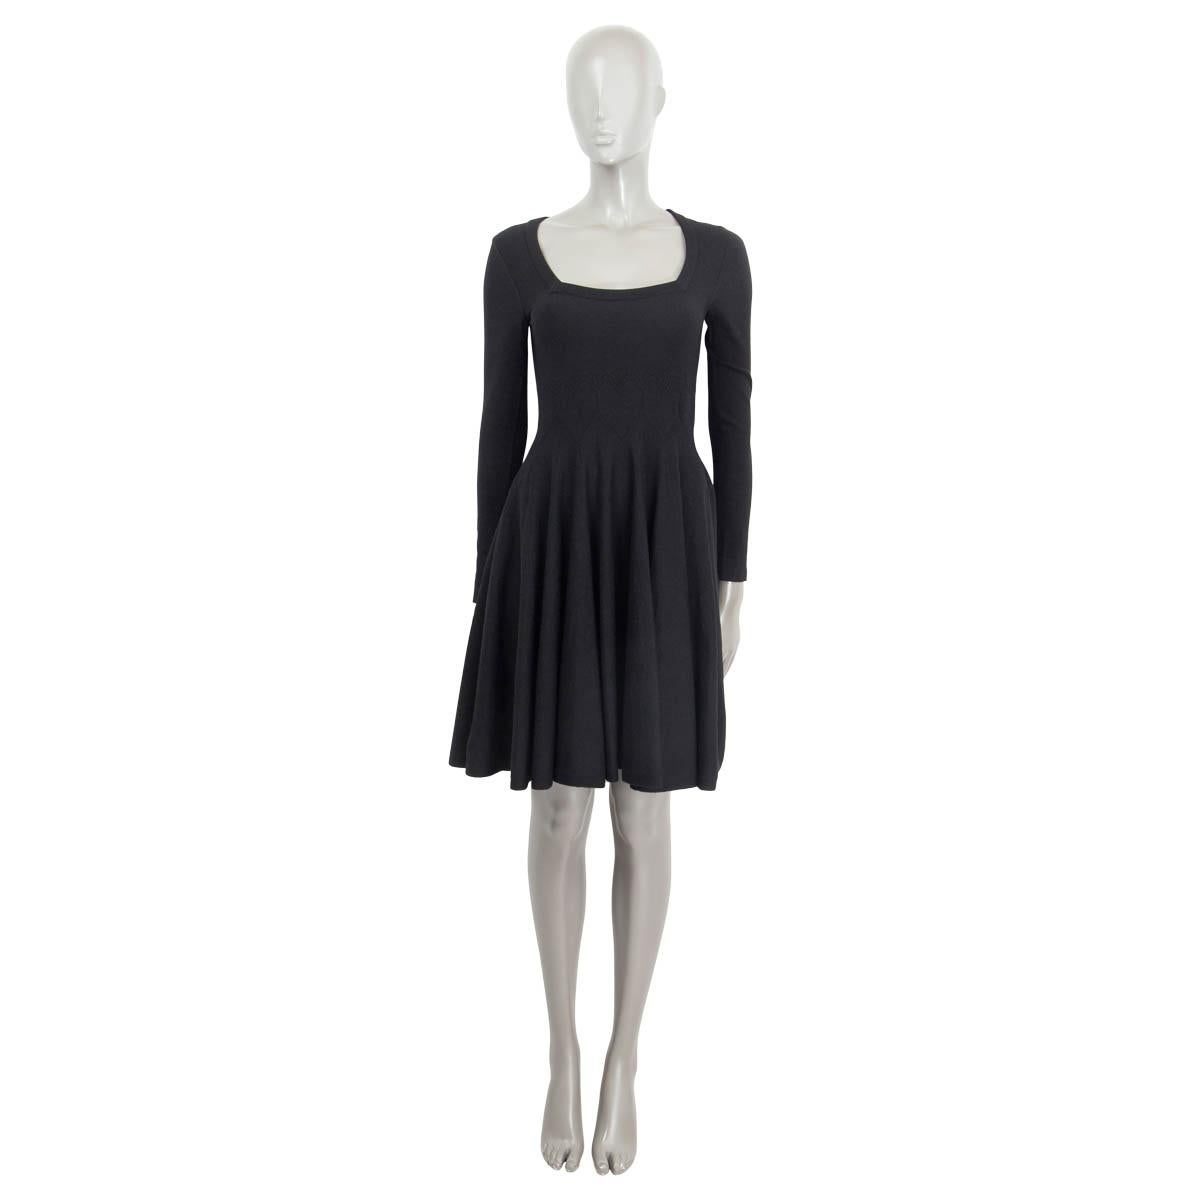 100% authentic Alaïa flared long-sleeve jacquard wool (missing tag) dress with a square neckline. Unlined. Has been worn and is in excellent condition. 

Measurements
Tag Size	Missing Tag
Size	S
Shoulder Width	39cm (15.2in)
Bust	76cm (29.6in) to